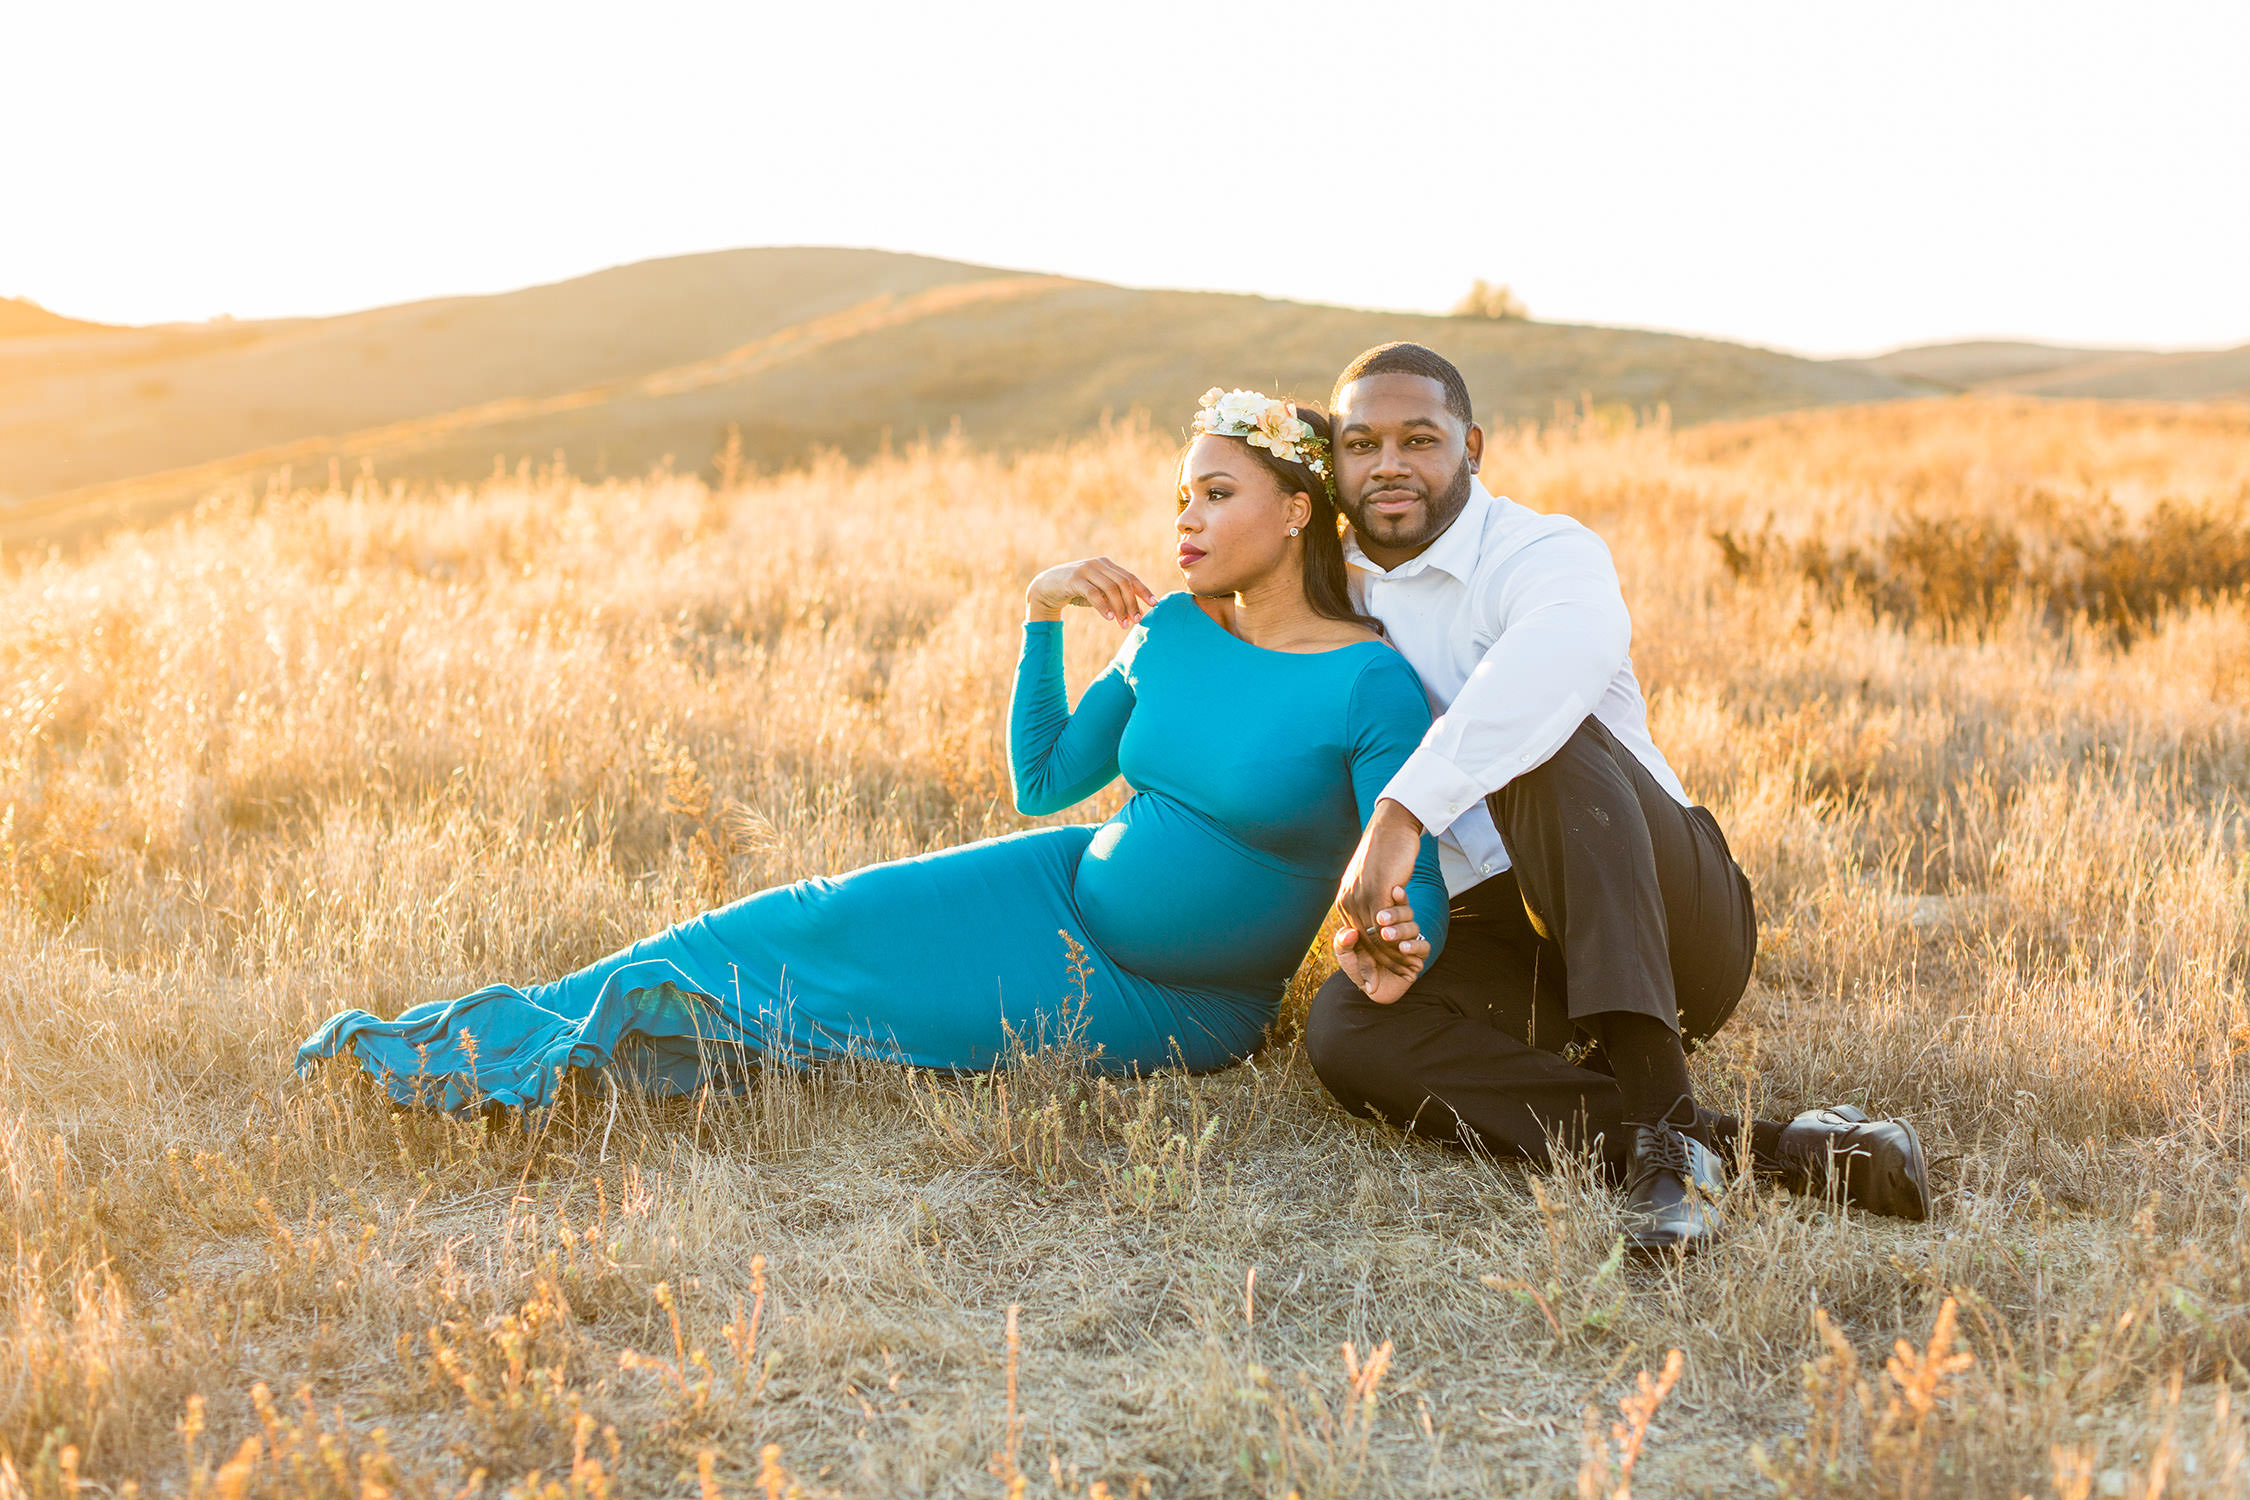 Maternity Session Teal dress at trailhead in Chino Hills, CA